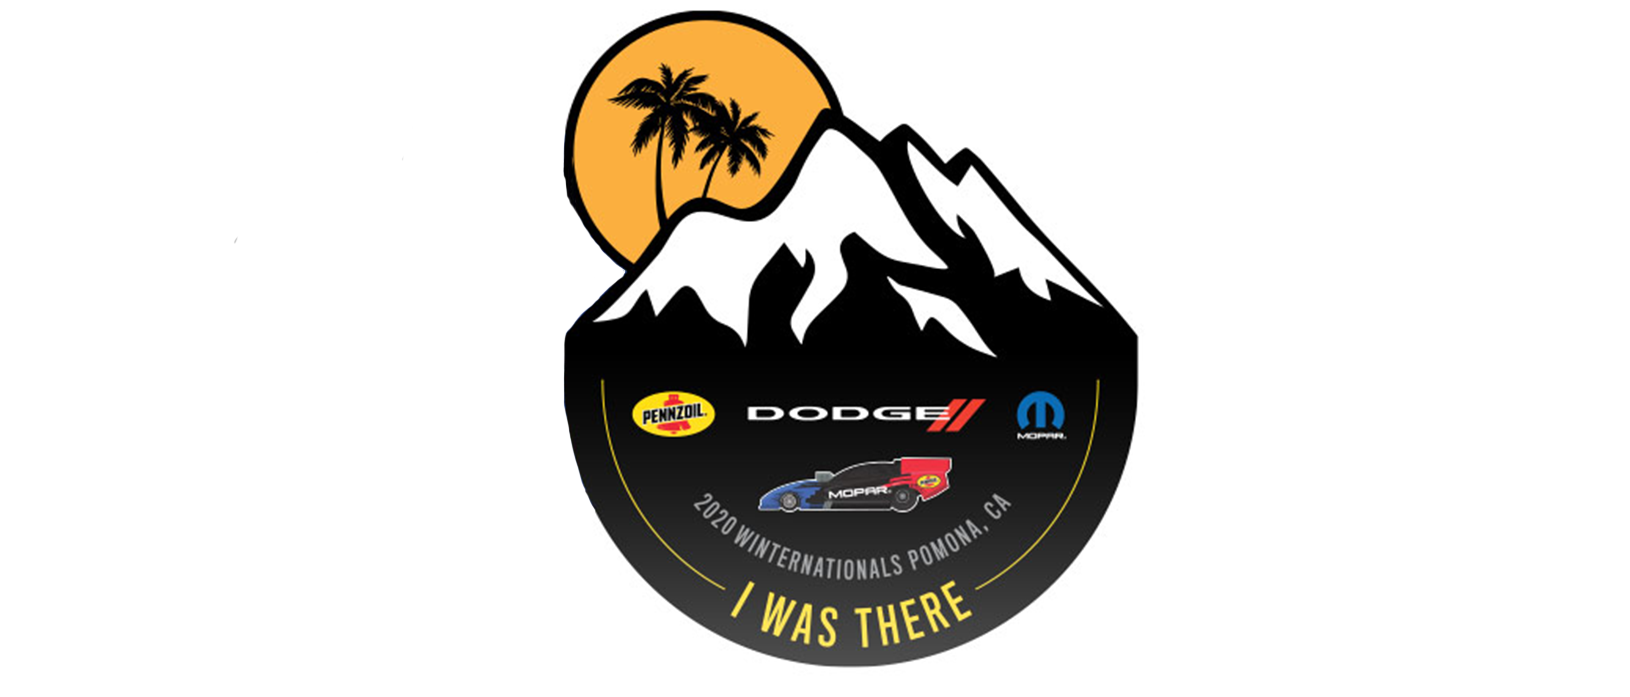 I was there event logo